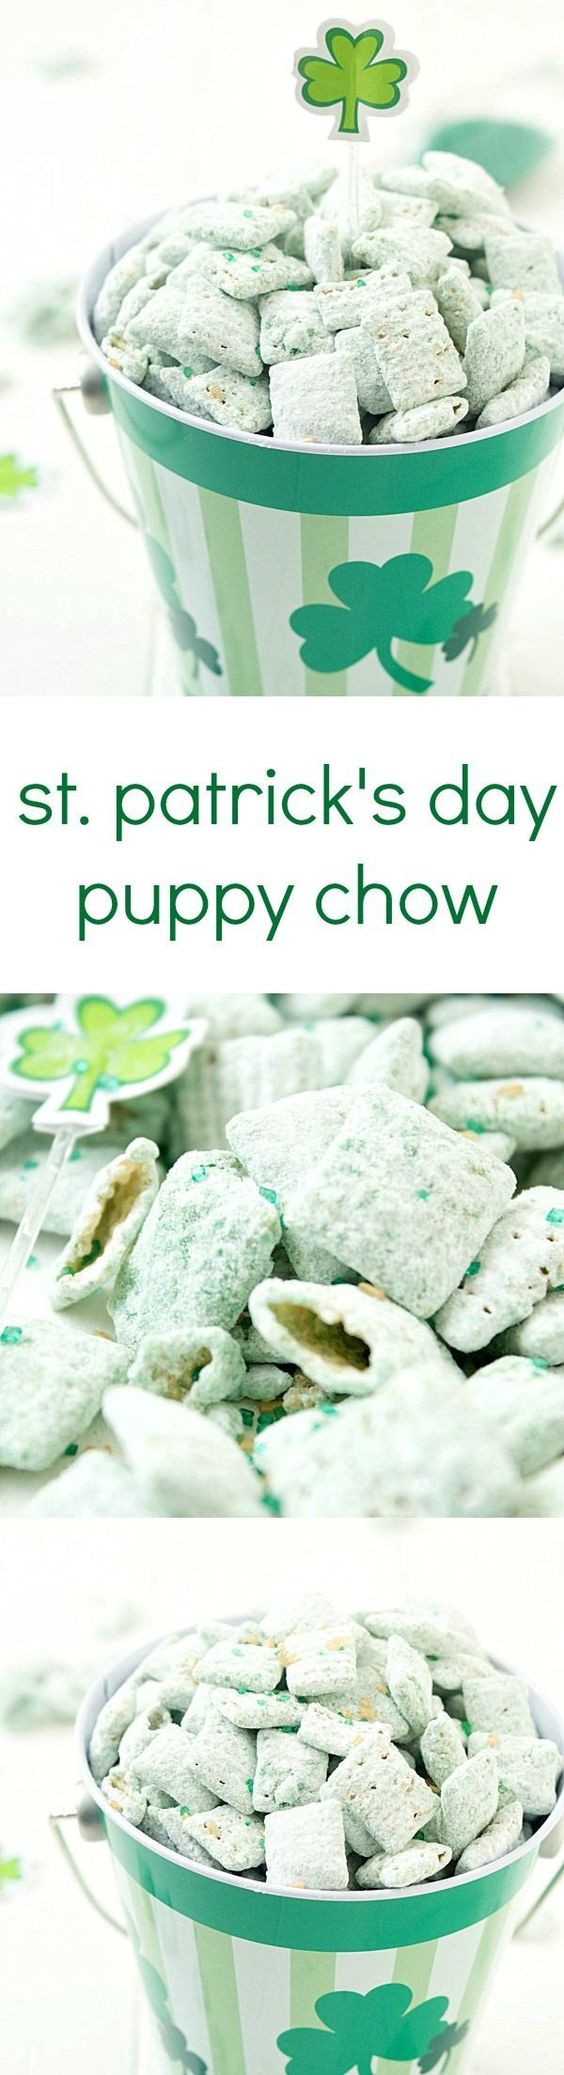 Recipes For St Patrick's Day Party
 The BEST Easy St Patrick’s Day Desserts and Treats